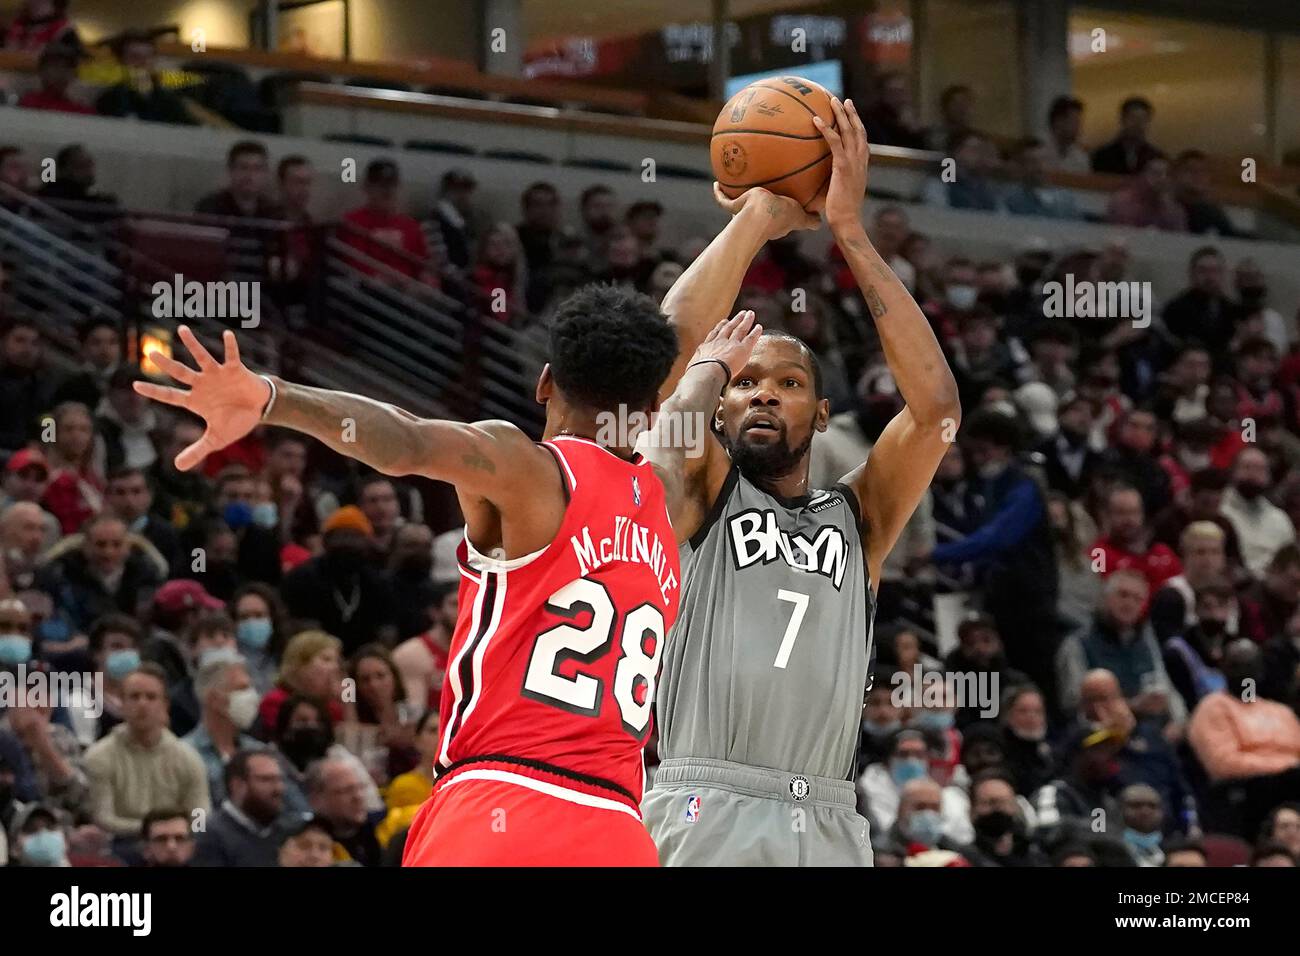 RETRANSMISSION TO REMOVE SCORE - Brooklyn Nets' Kevin Durant shoots over  Chicago Bulls' Alfonzo McKinnie during the first half of an NBA basketball  game Wednesday, Jan. 12, 2022, in Chicago. (AP Photo/Charles